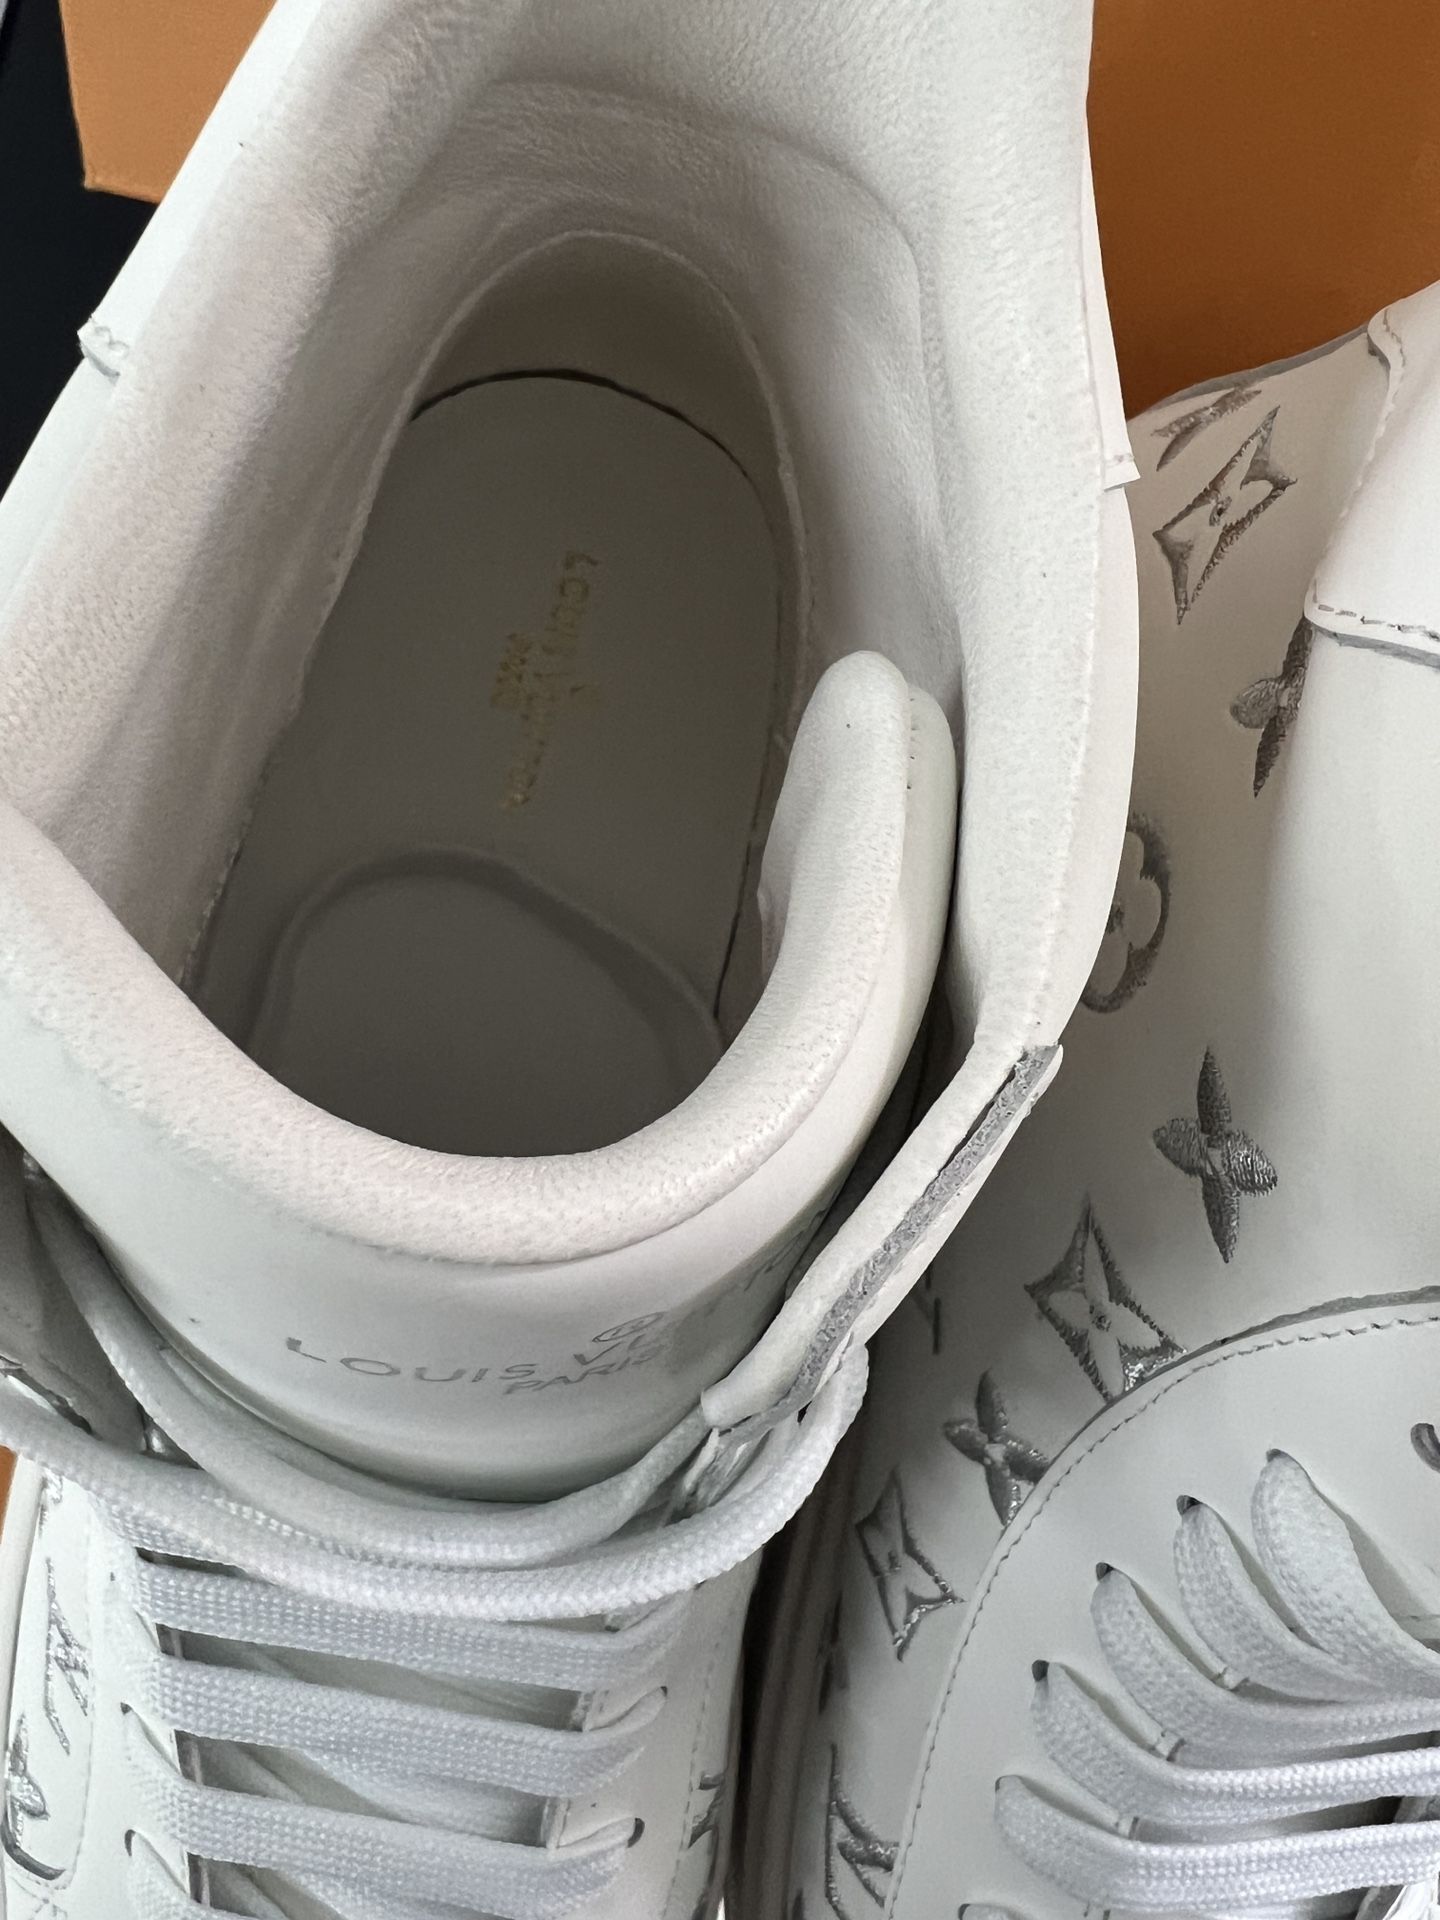 Sz 9 Louis Vuitton Mens Sneaker Match-Up Bicolor Sneakers 8.5/10 for Sale  in Revere, MA - OfferUp